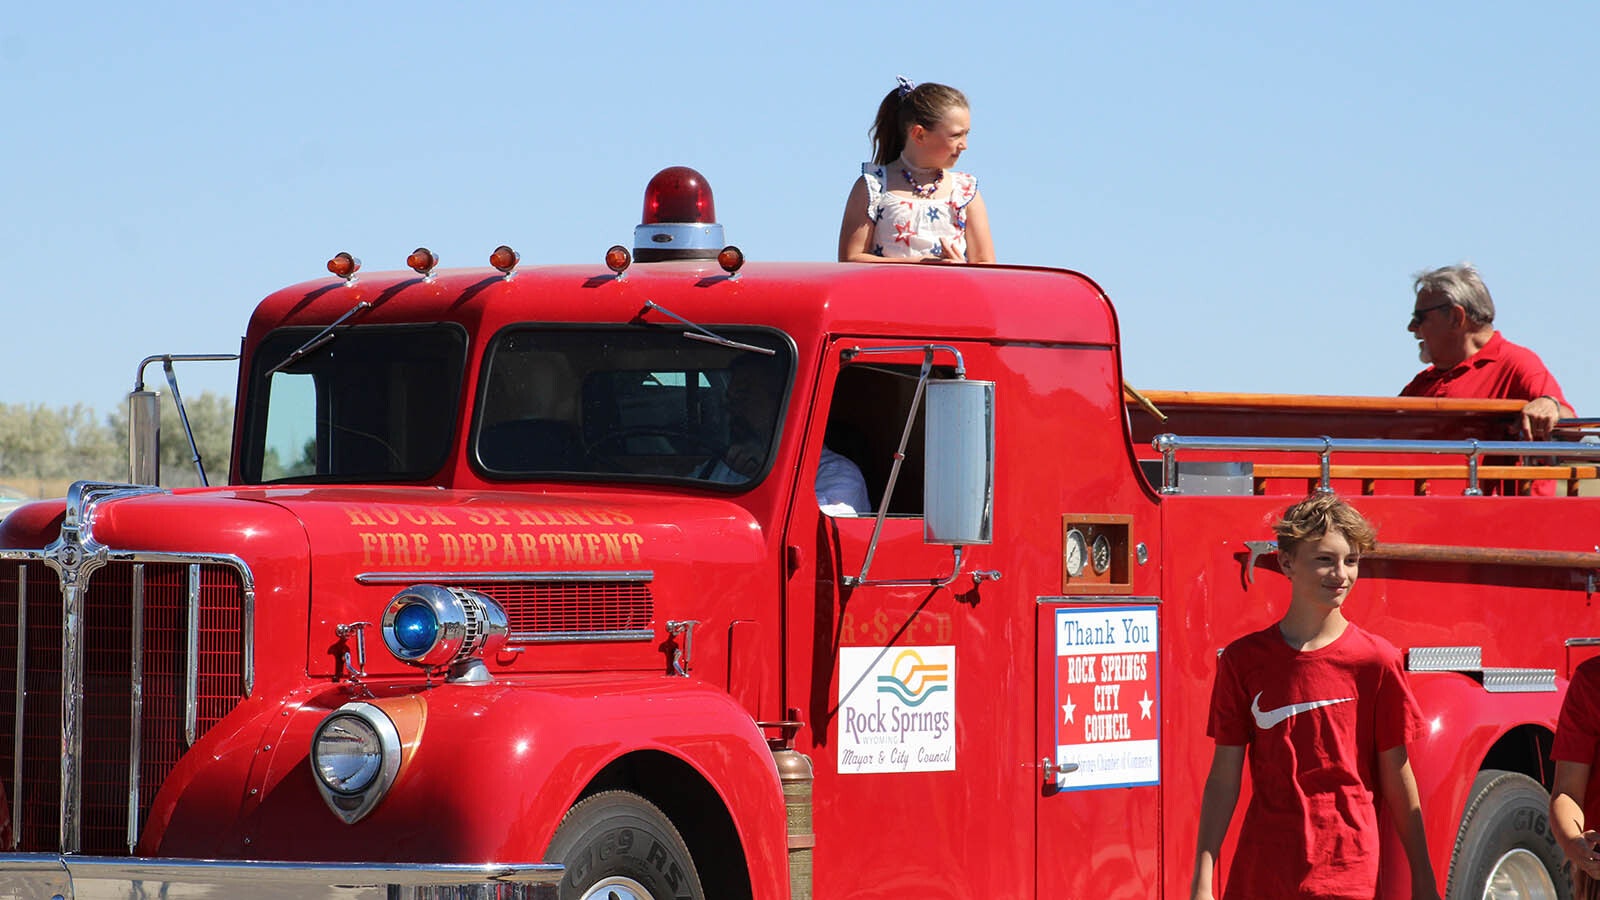 A lucky girl gets a ride in this vintage fire truck during Thursday's Rock Springs Liberty Parade.